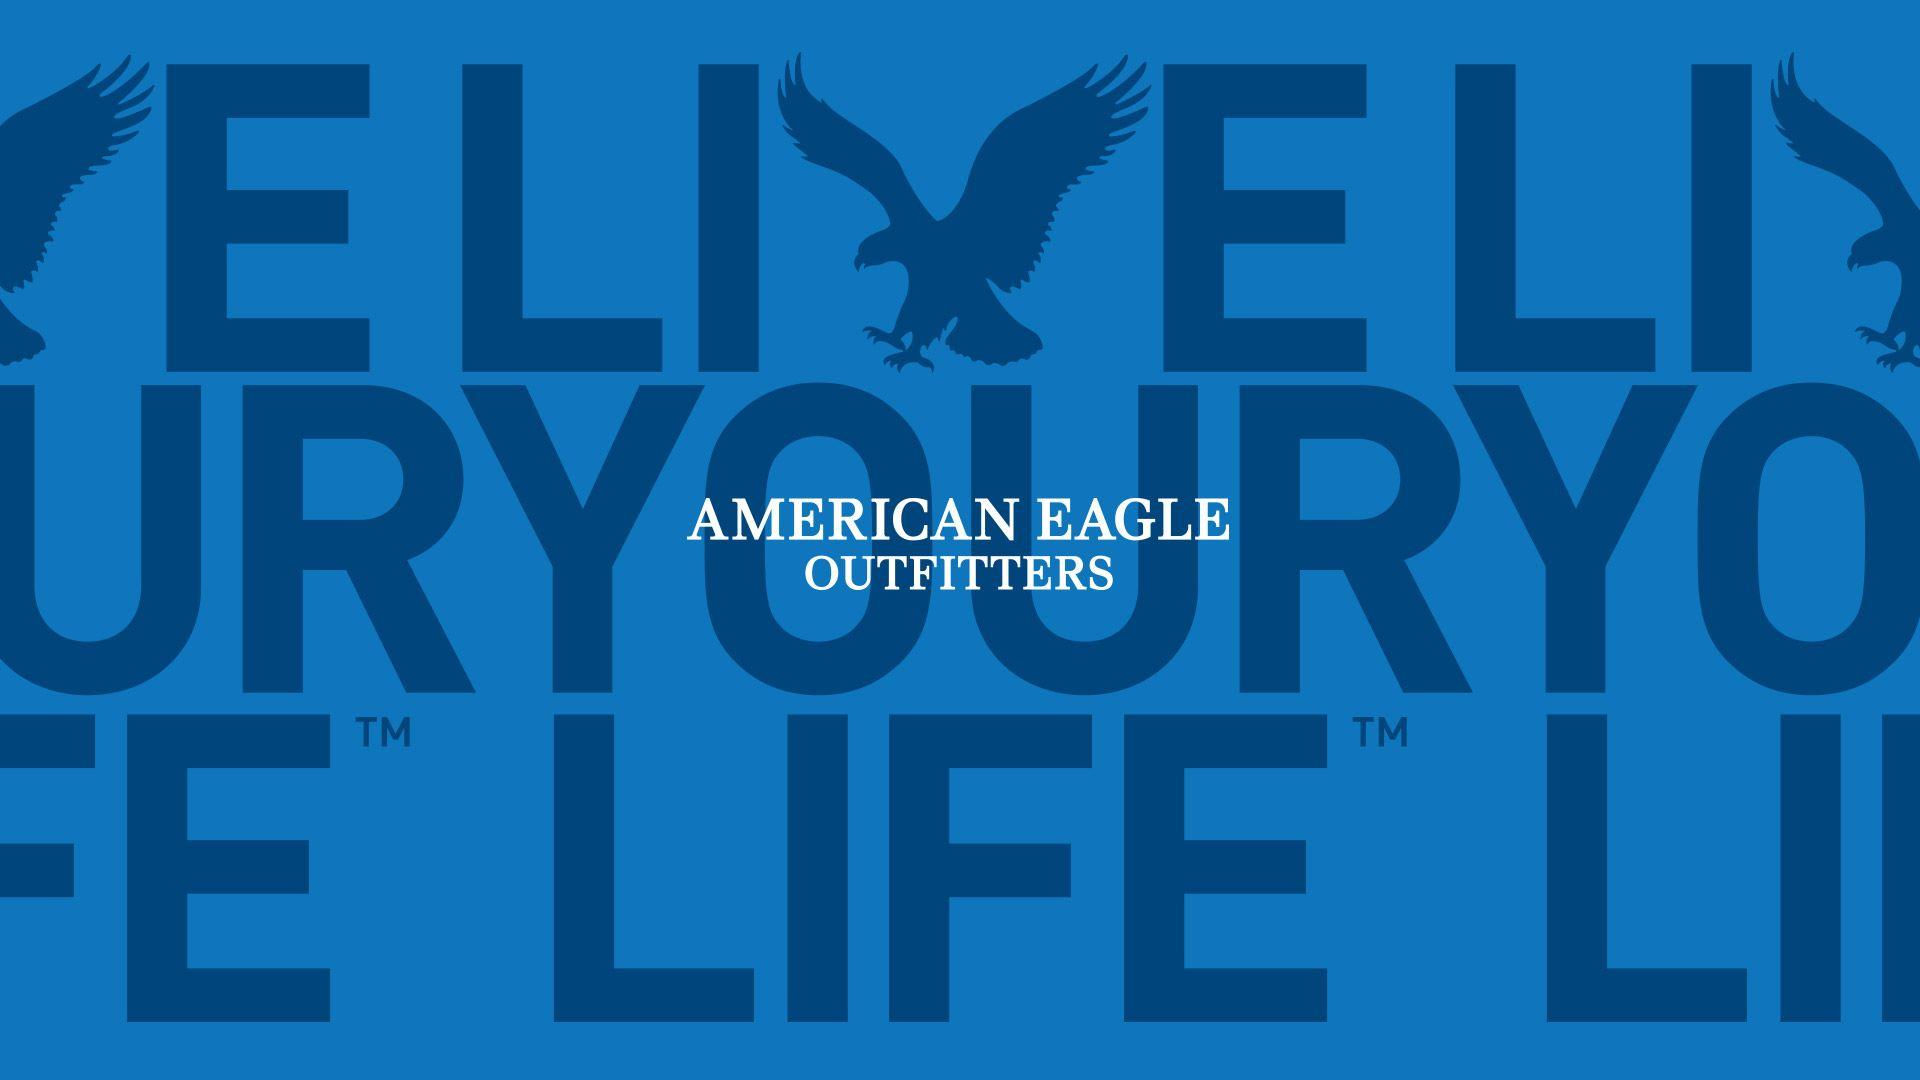 American Eagle Outfitters Collateral